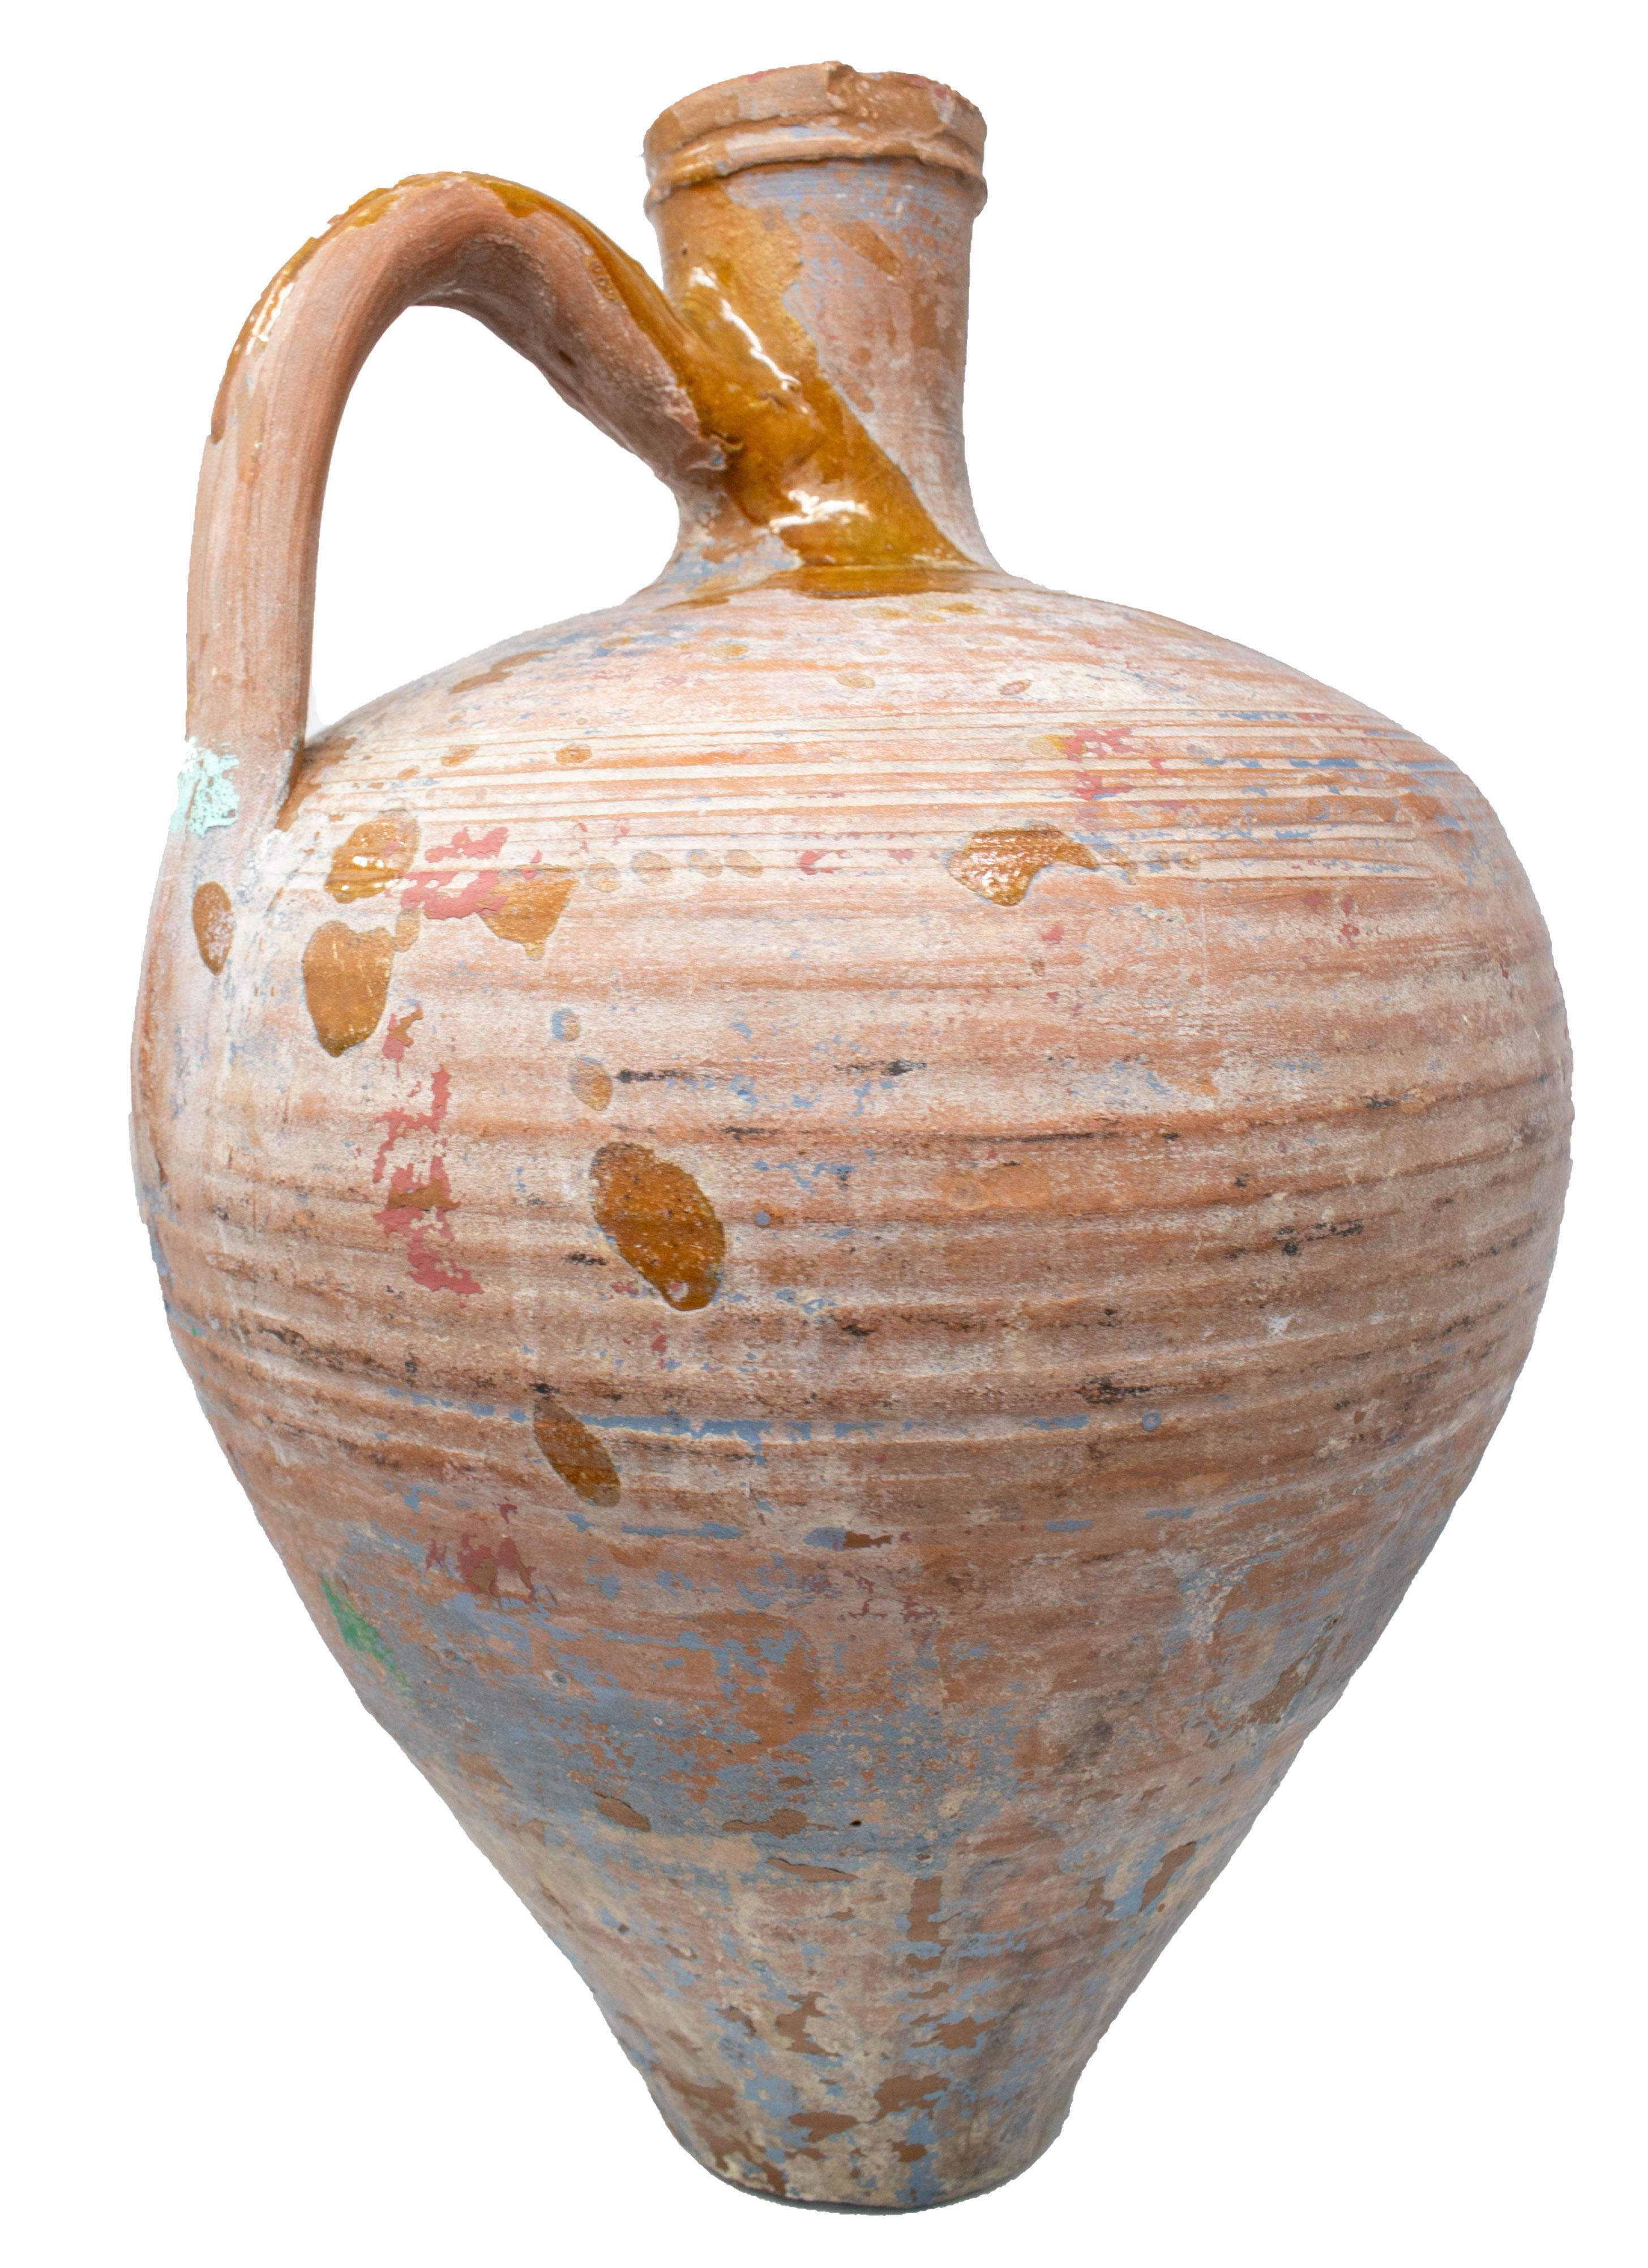 1950s Spanish Andalusian handmade terracotta vase splashed with brown glazing.